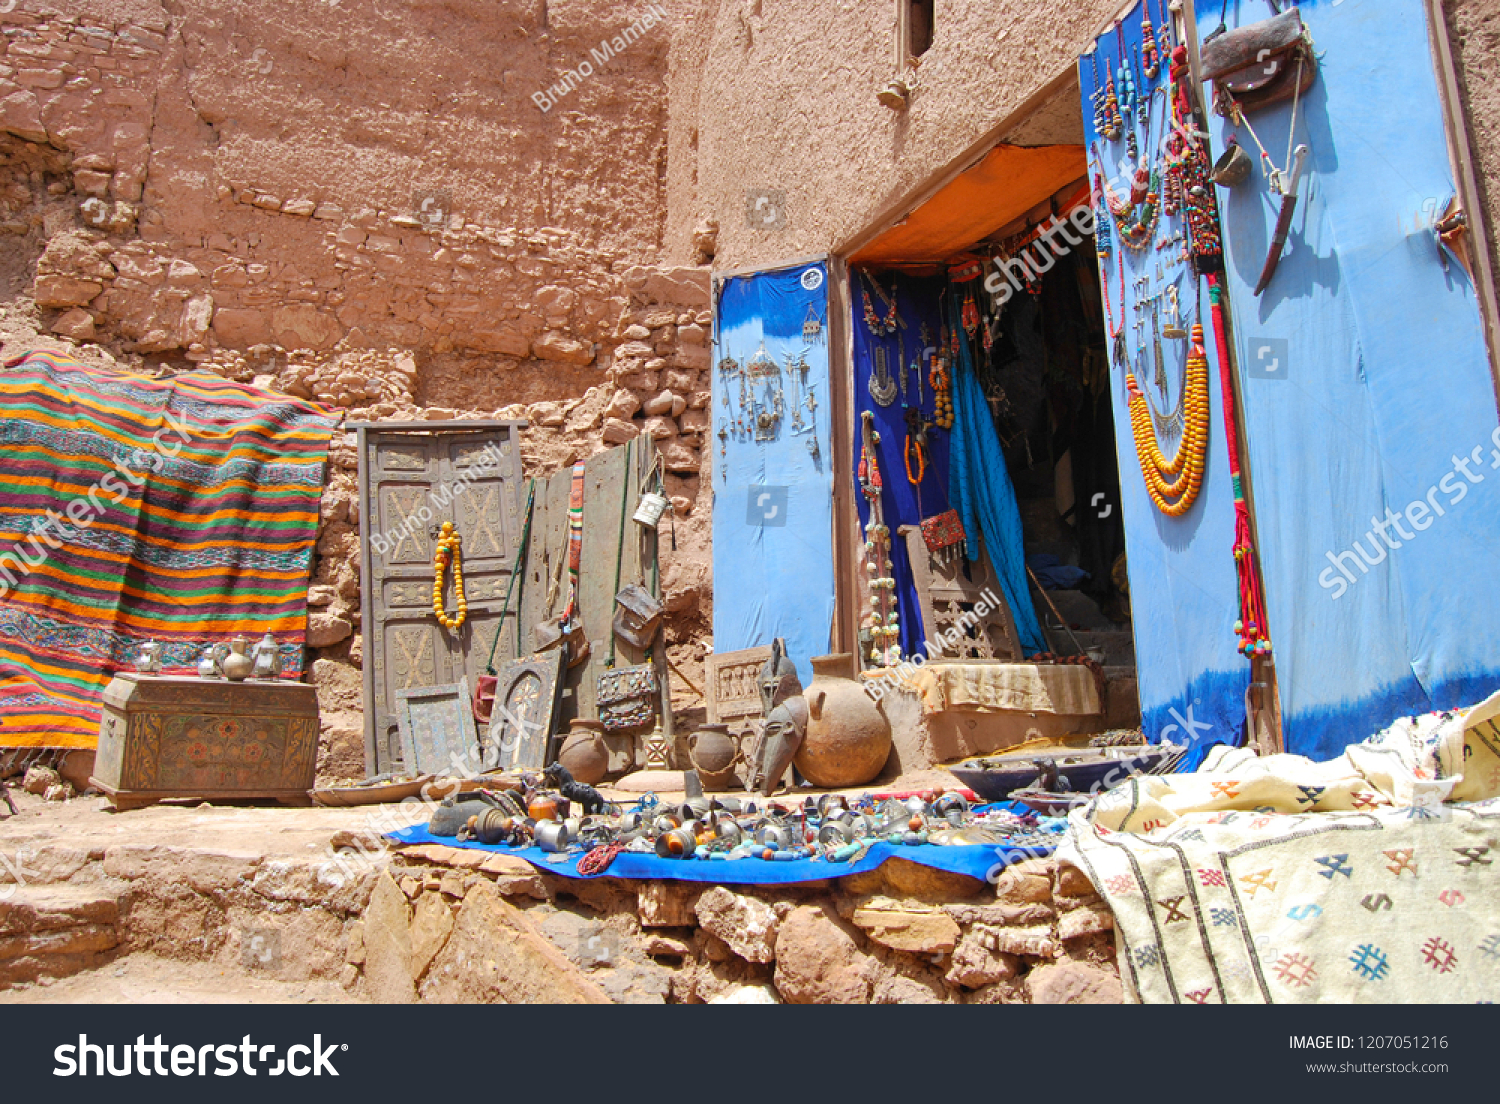 View of craft stalls at Kasbah Ait Ben Haddou near Ouarzazate in the Atlas Mountains of Morocco. UNESCO World Heritage Site since 1987. #1207051216